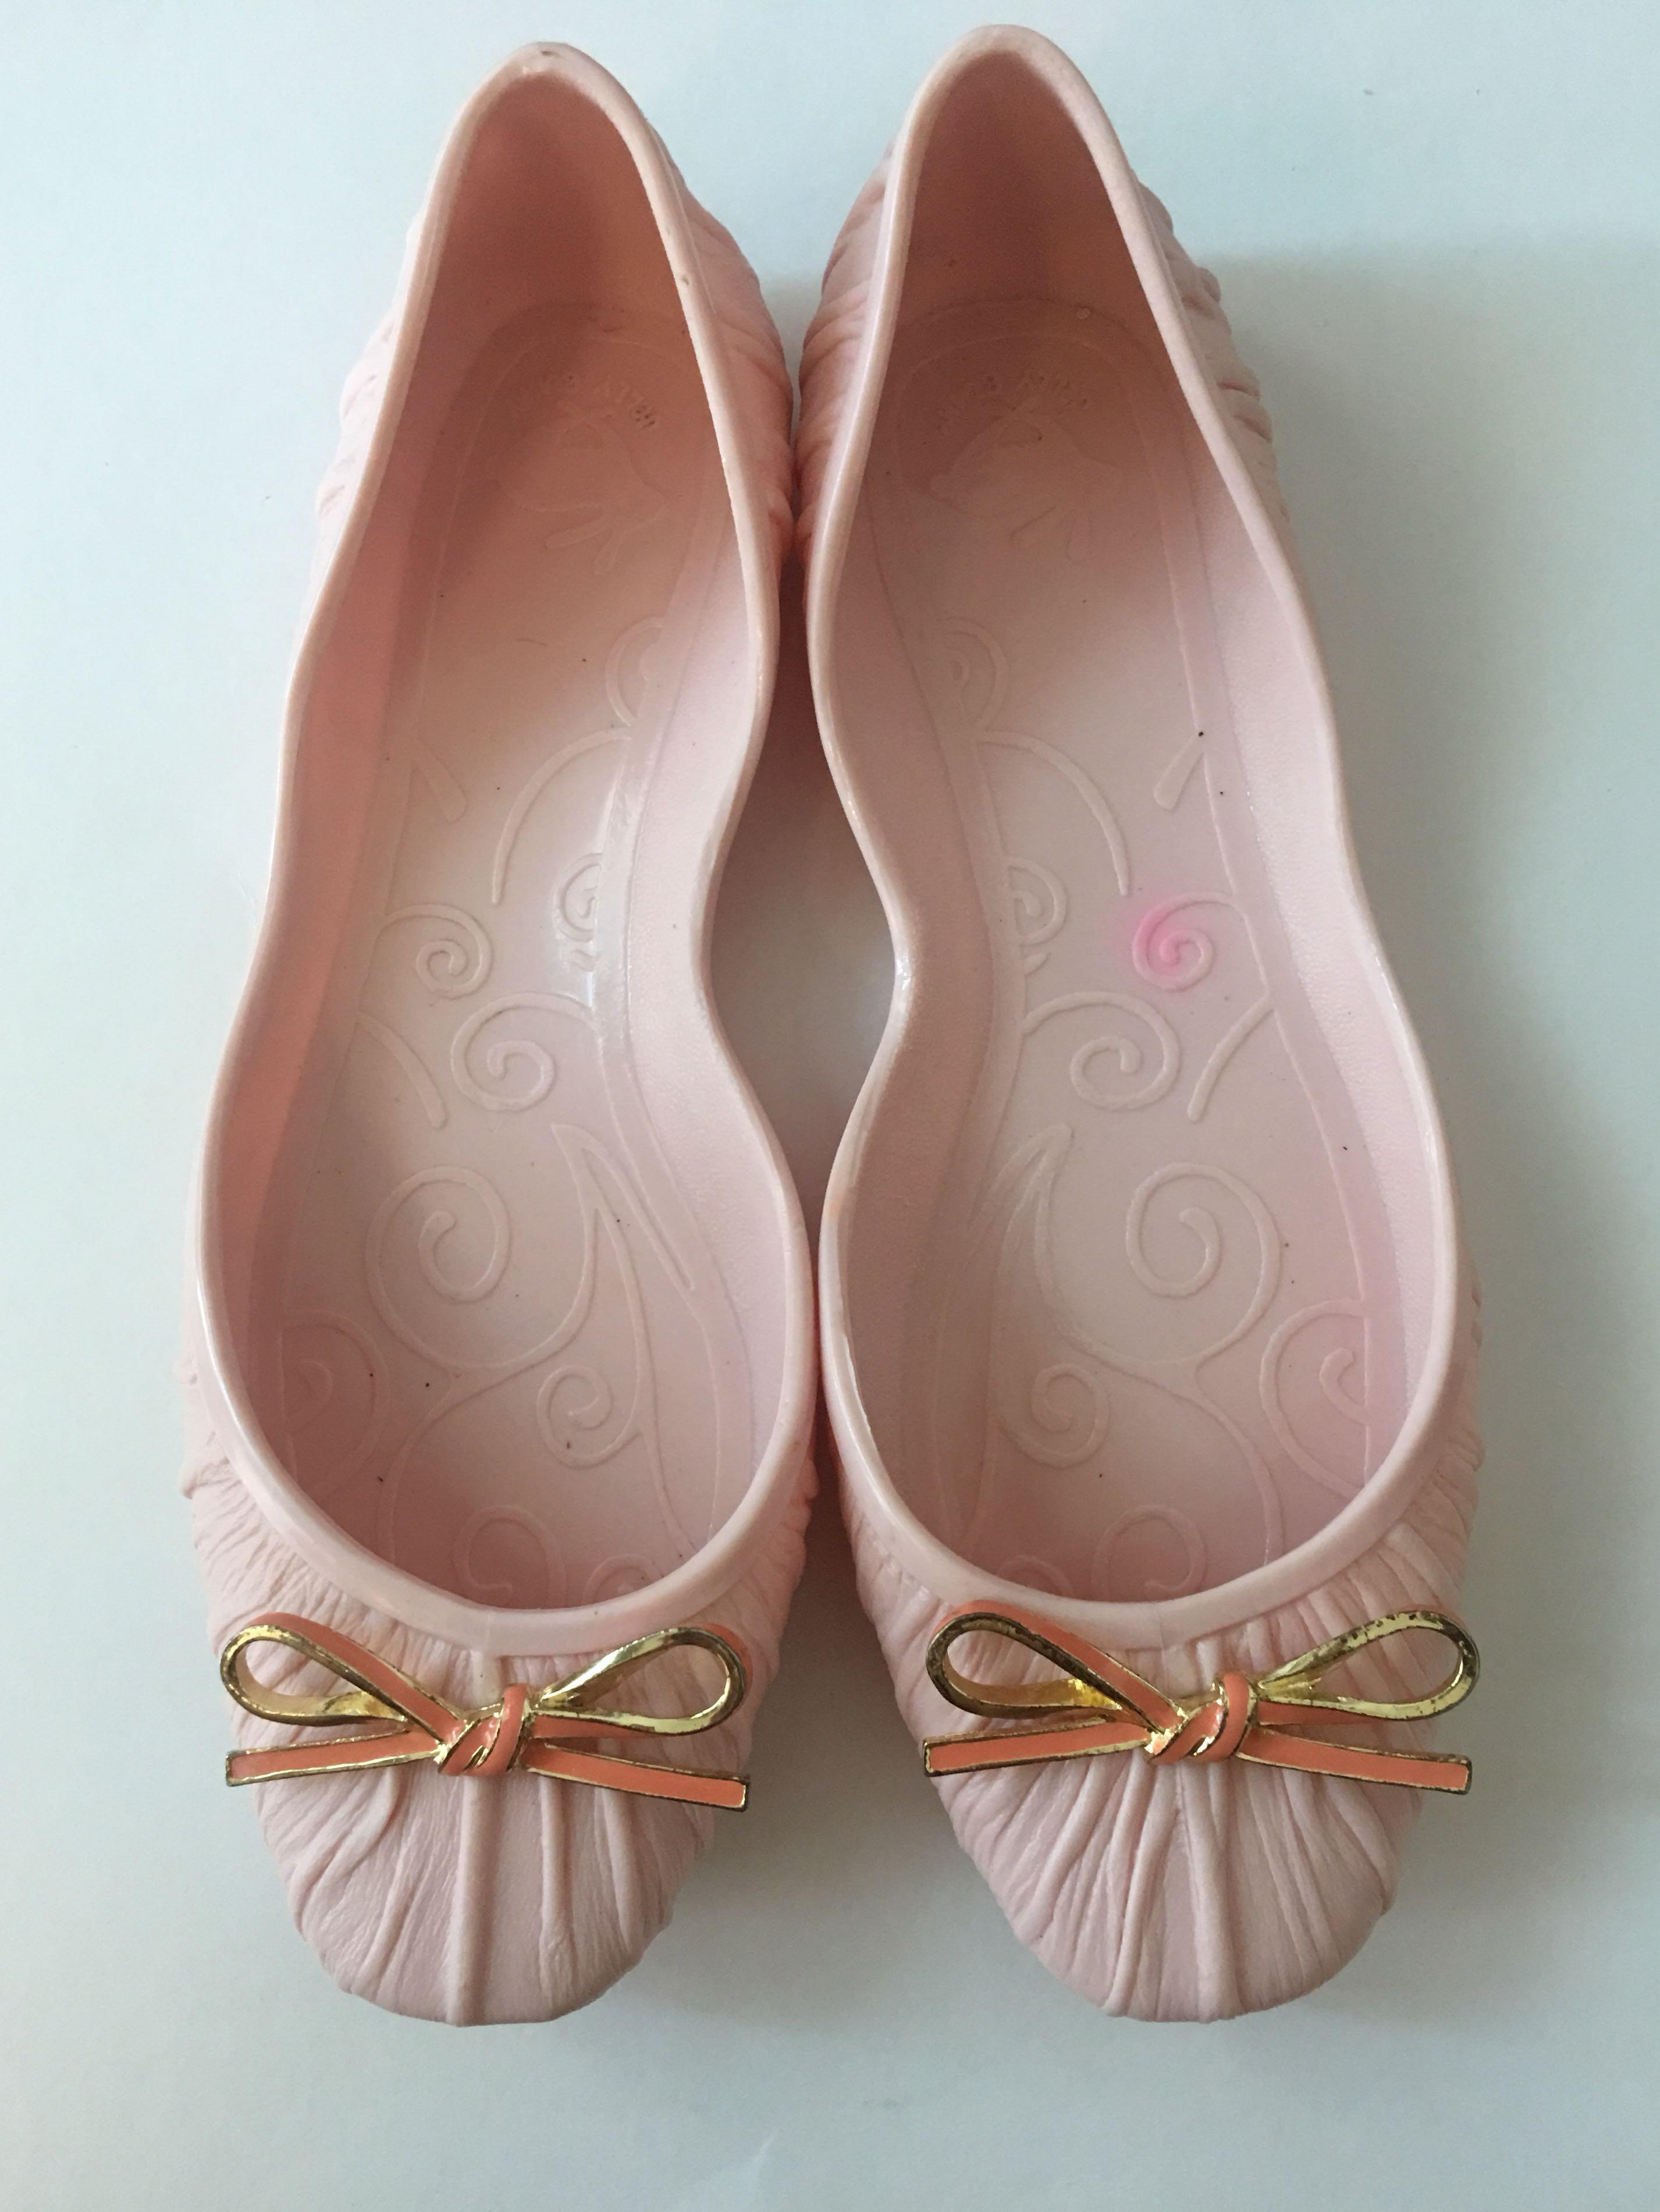 jelly bunny shoes price